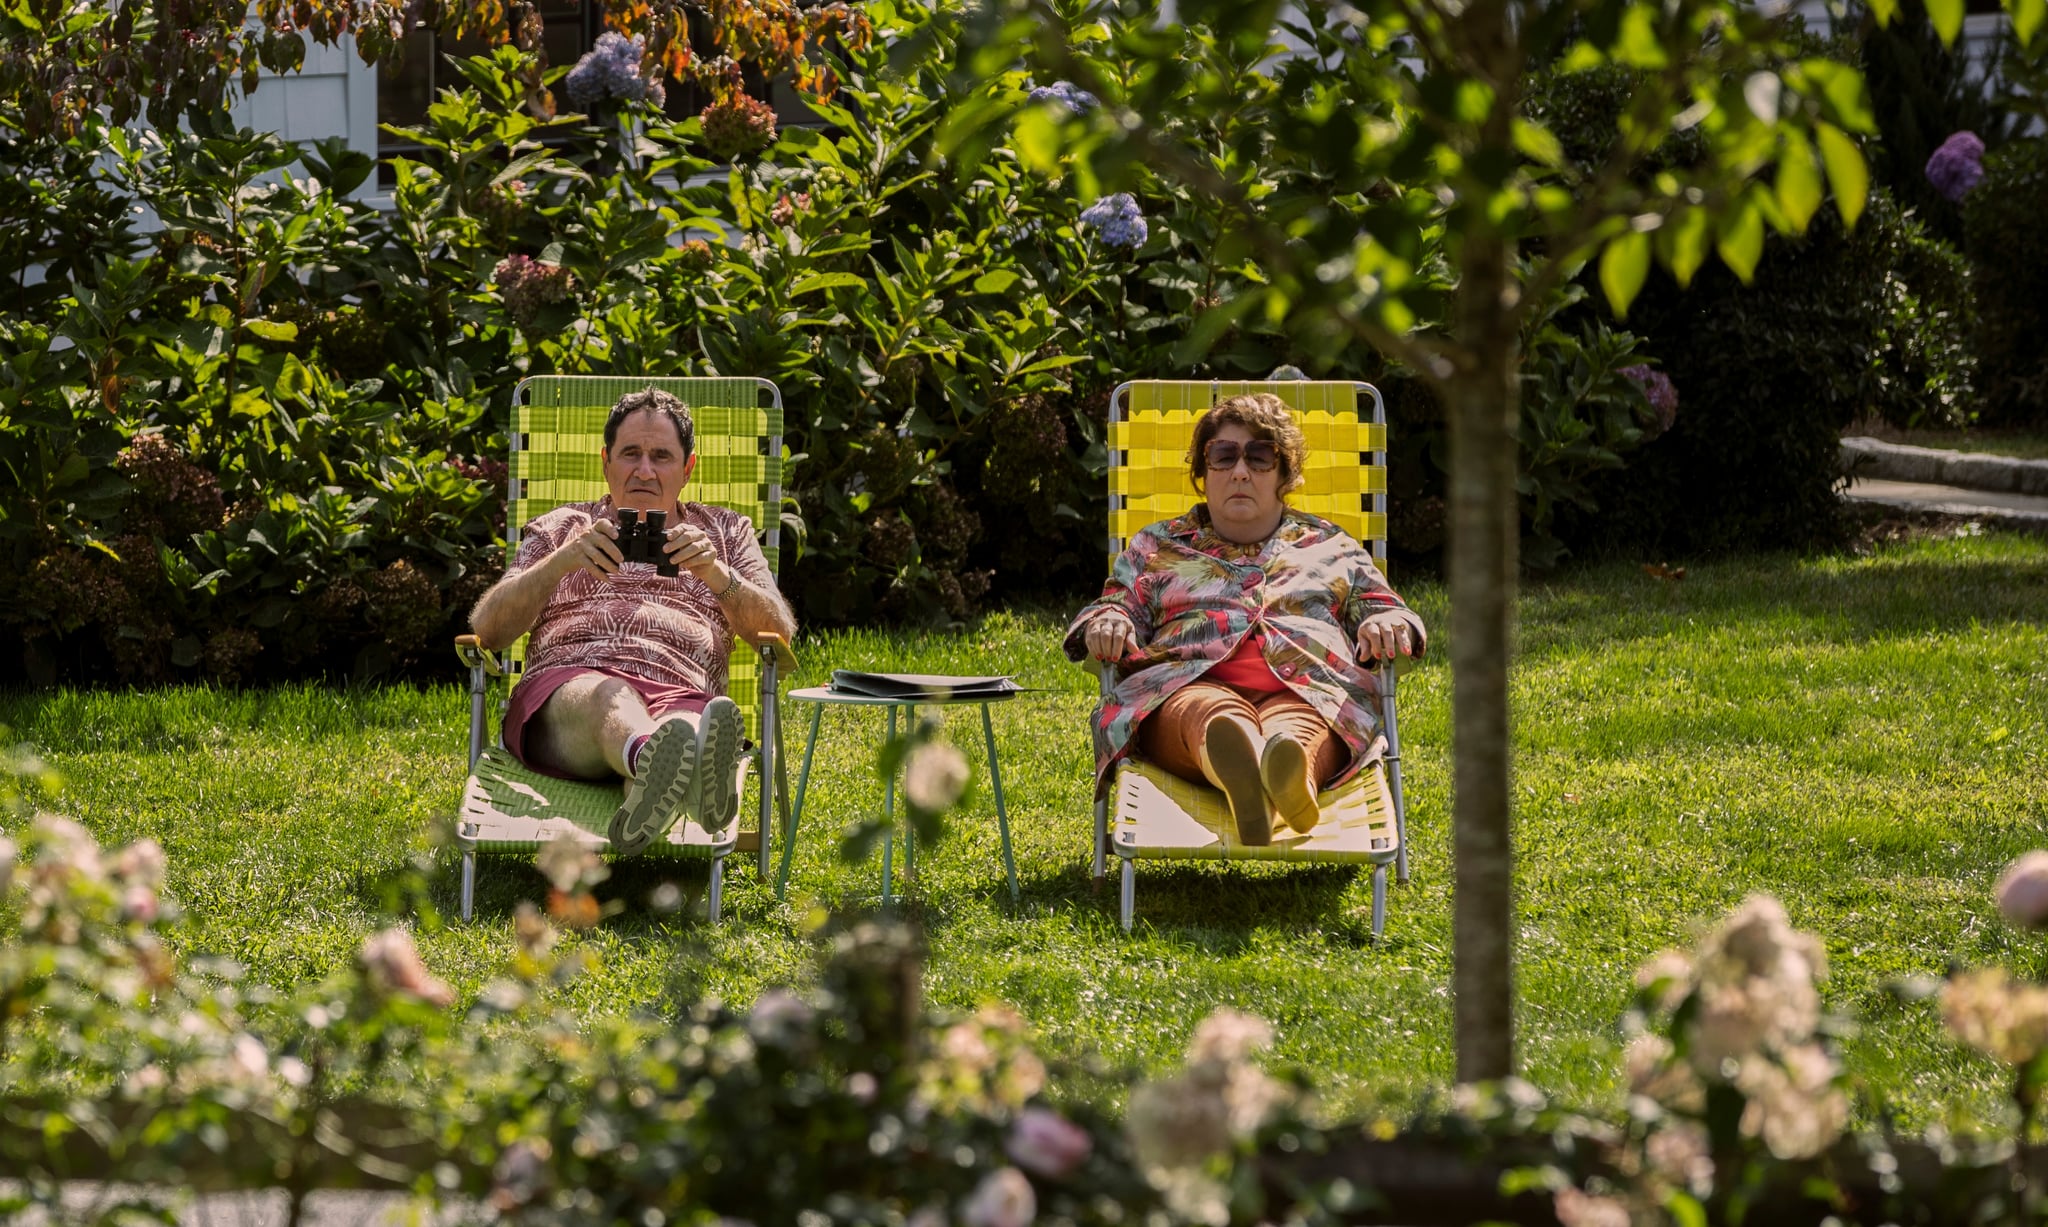 The Watcher. (L to R) Richard Kind as Mitch, Margo Martindale as Mo/Maureen in episode 101 of The Watcher. Cr. Eric Liebowitz/Netflix © 2022